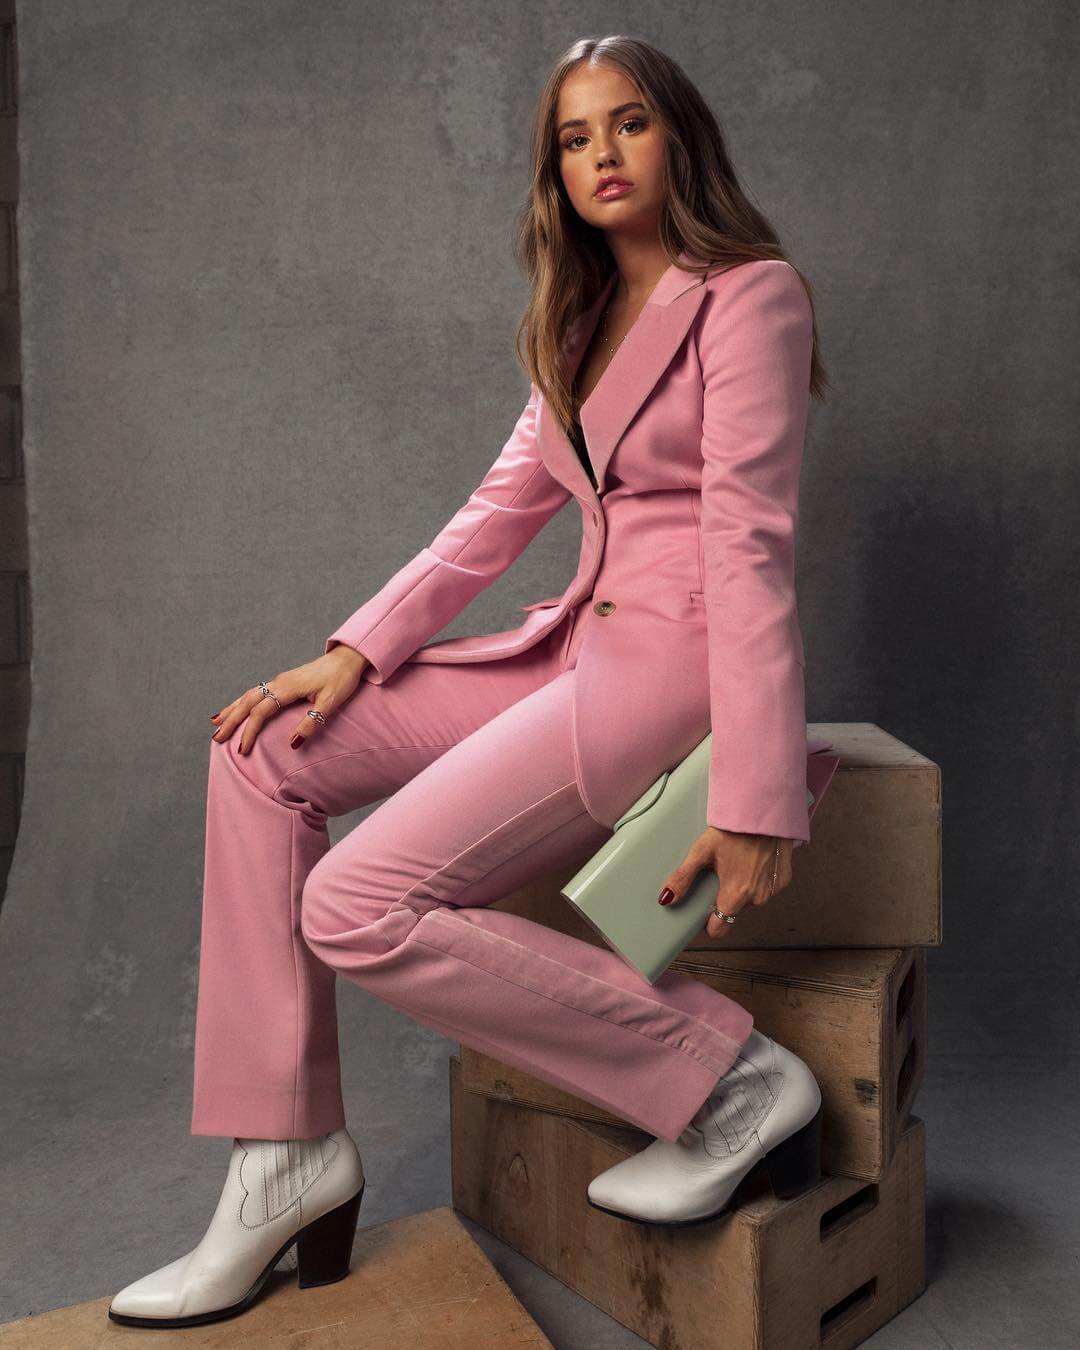 Pretty In Pink - Debby Ryan Looked Surreal In Her Pastel Pink Pantsuit Moment